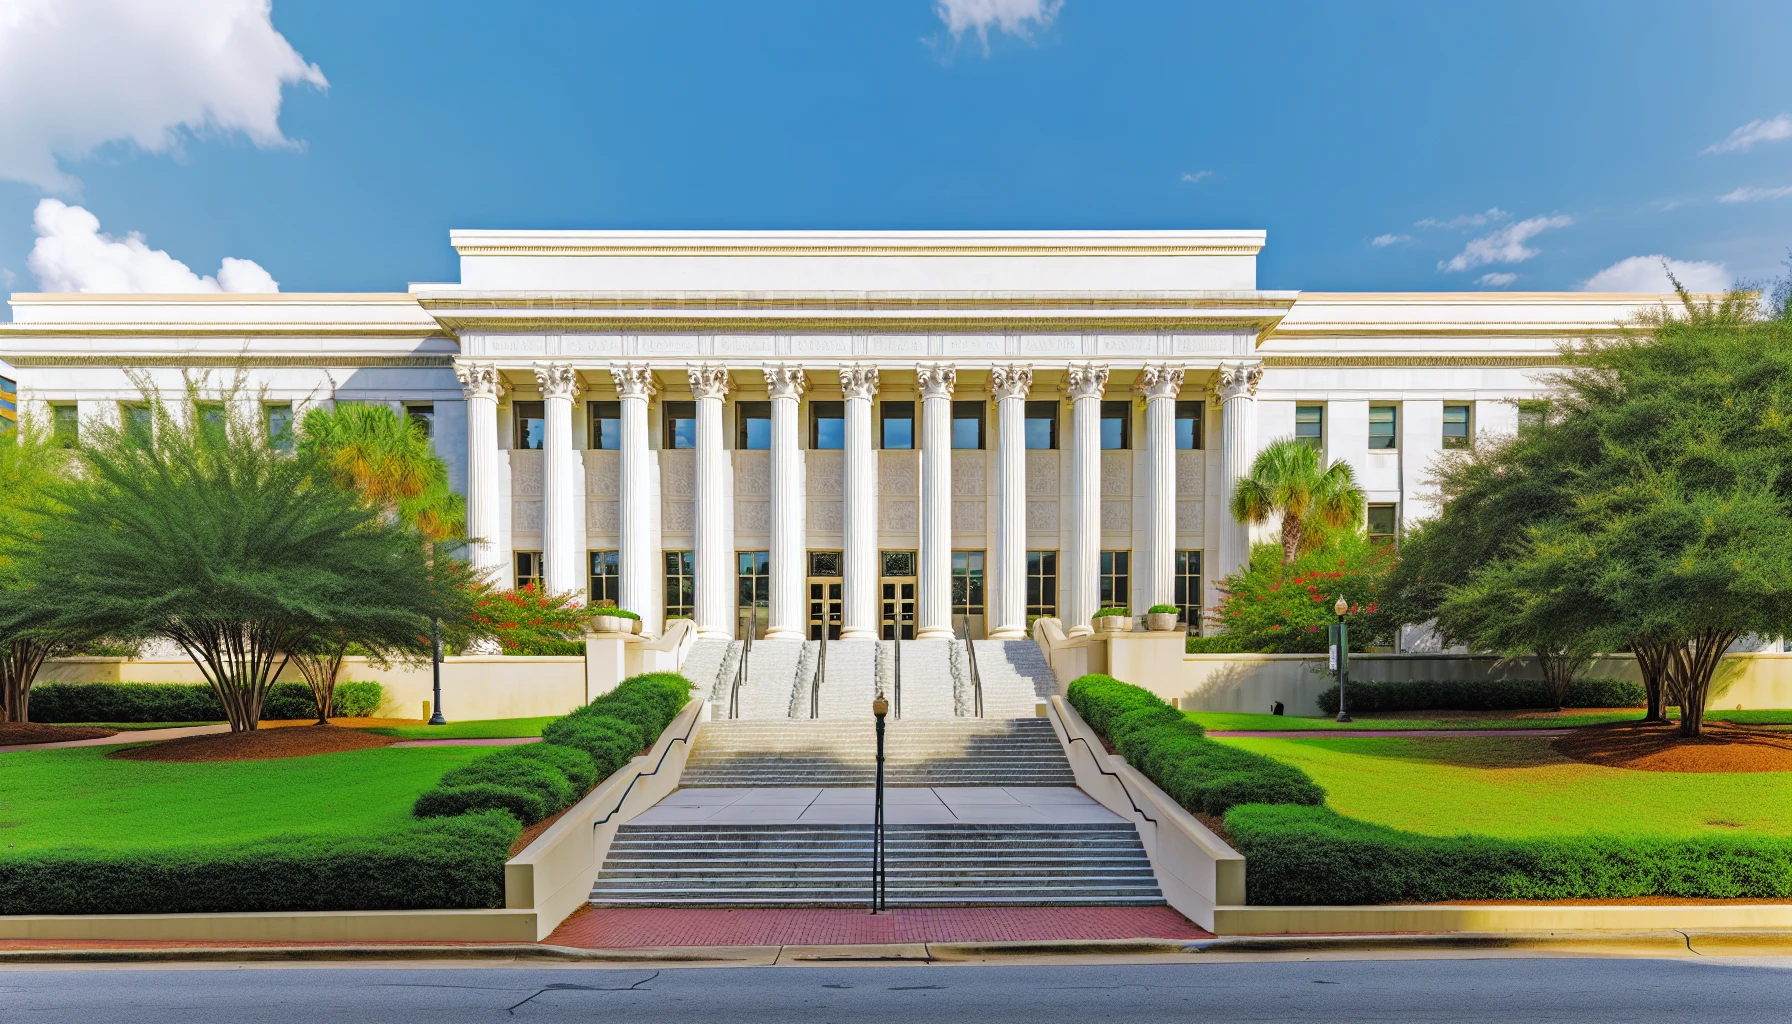 A photo of the Florida Supreme Court building representing the legal system in Florida